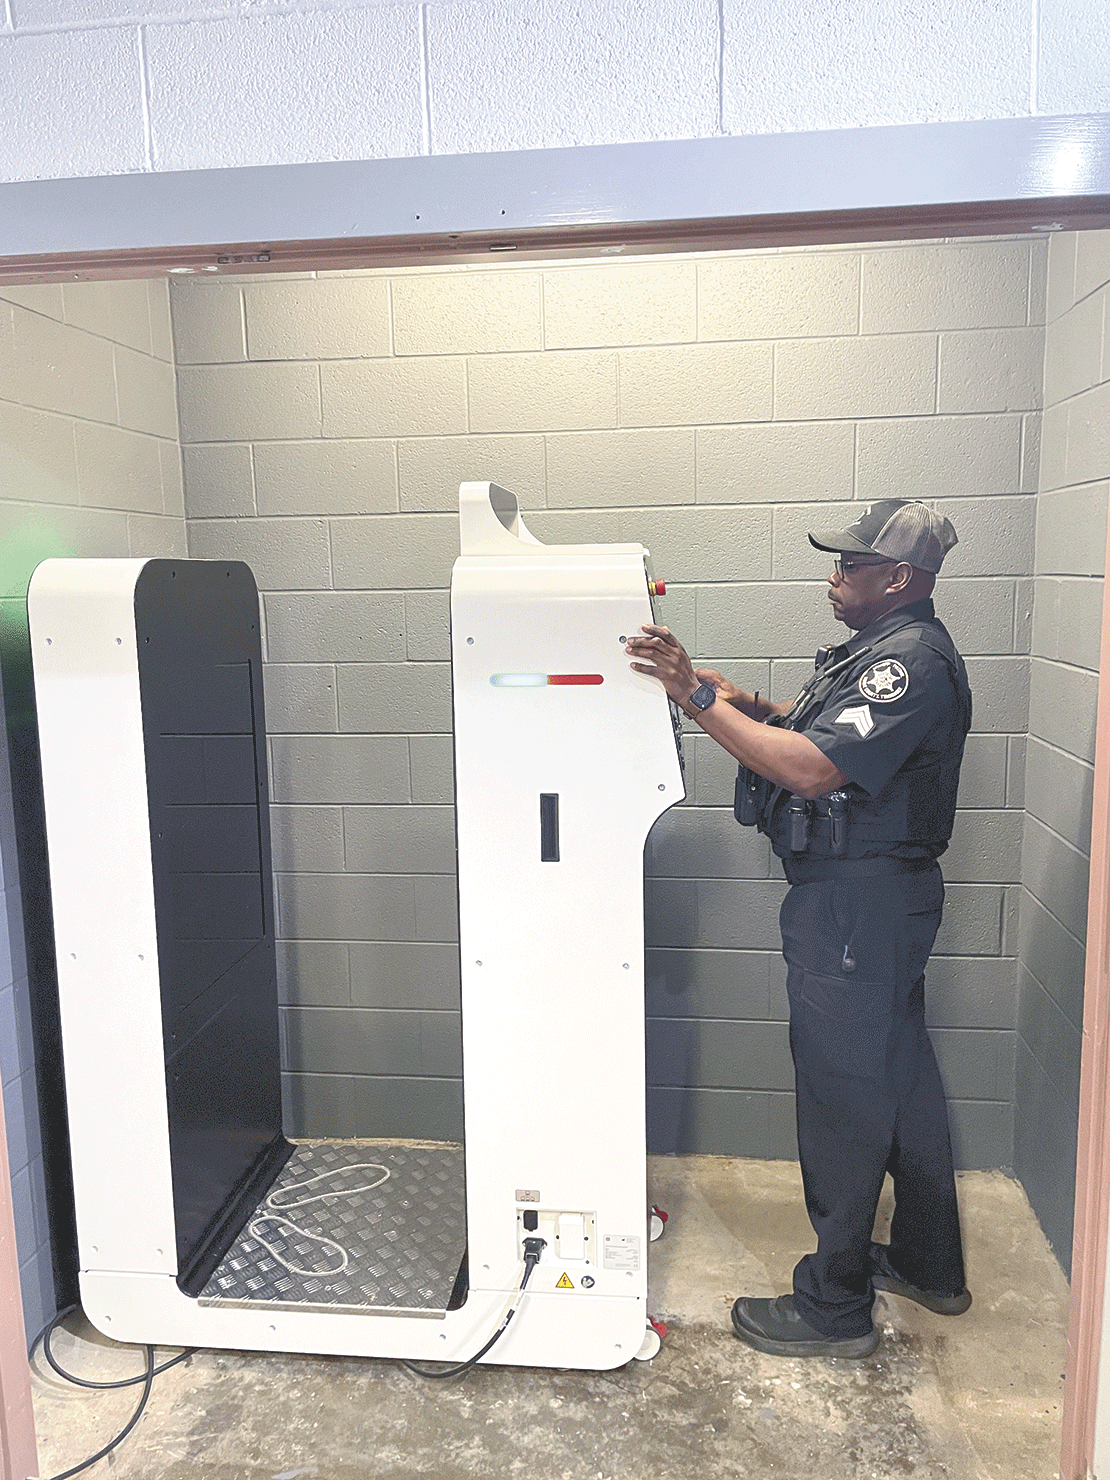 Pictured showing how to use the machine is Sgt. Jerry Wilson. (submitted photo).